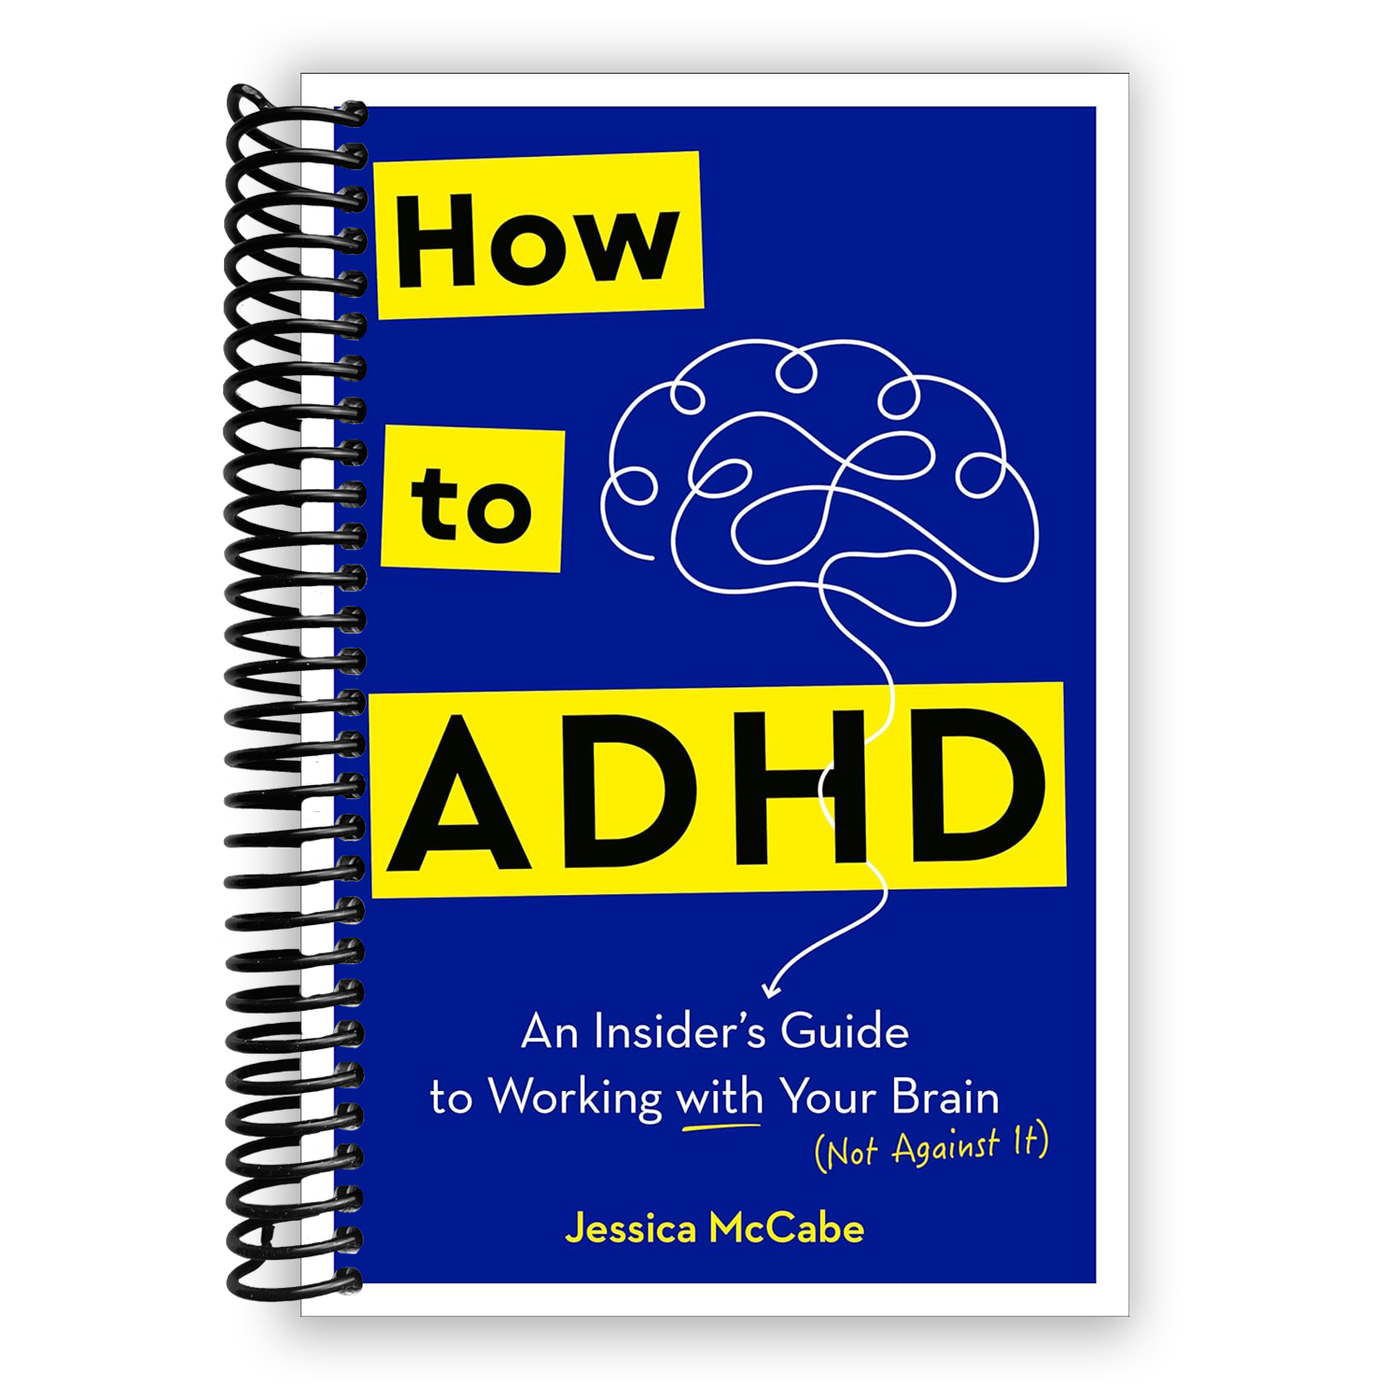 How to ADHD: An Insider's Guide to Working with Your Brain (Spiral Bound)